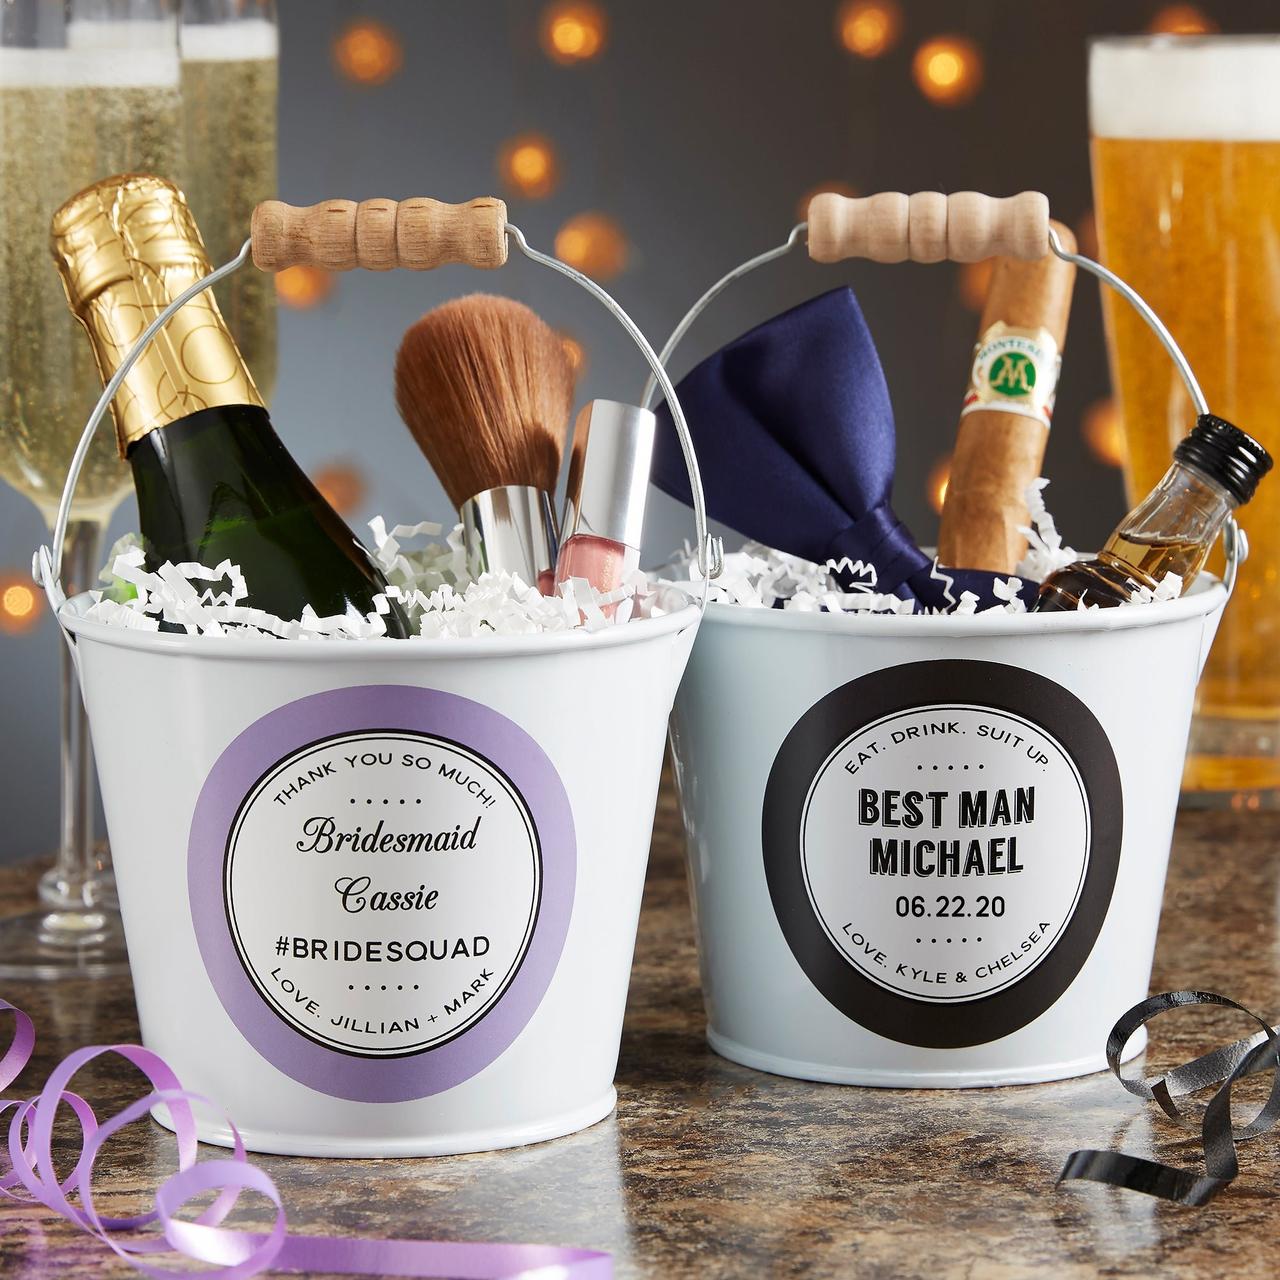 Top 10 Wedding Registry Gifts from Macy's—Blueprint Registry Guides